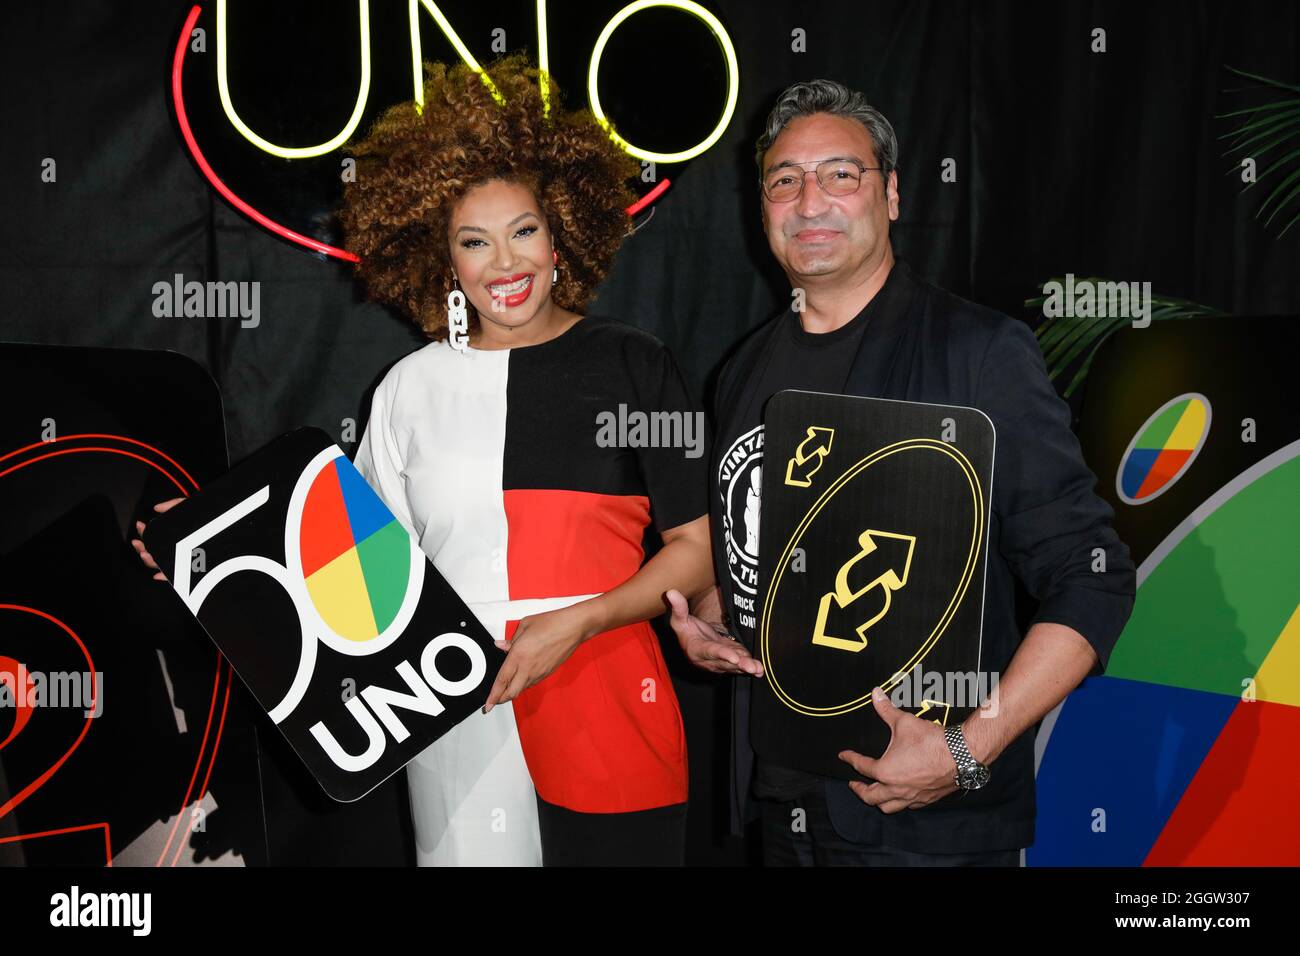 Berlin, Germany. 02nd Sep, 2021. Mousse T. and wife Khadra Sufi arrive at the charity event 'UNO Playing for Good' at Soho Haus. Credit: Gerald Matzka/dpa/Alamy Live News Stock Photo